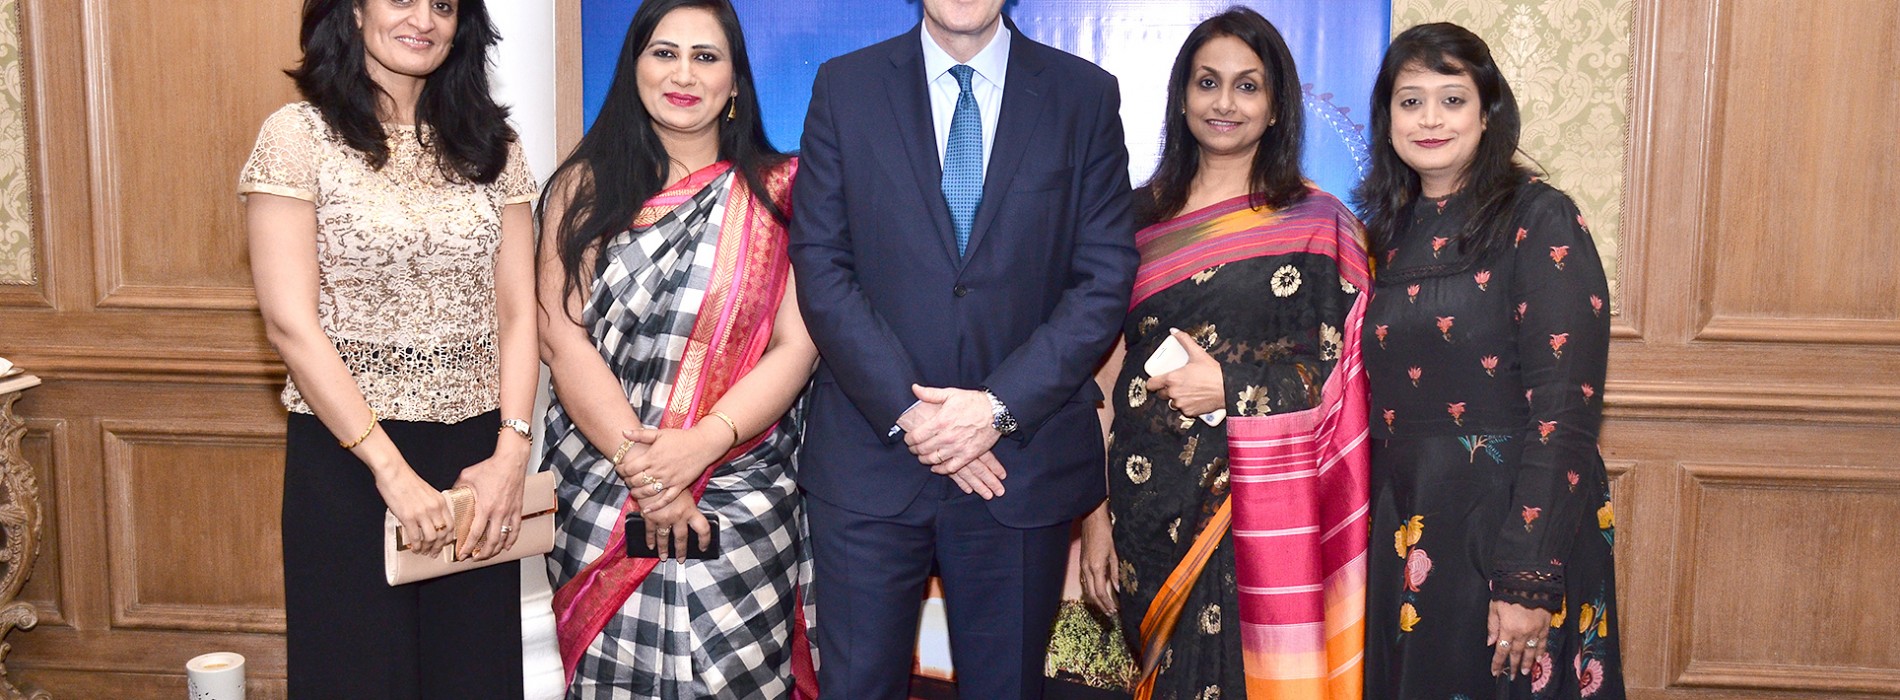 Commercial Director of Corinthia Hotels makes his first visit to India